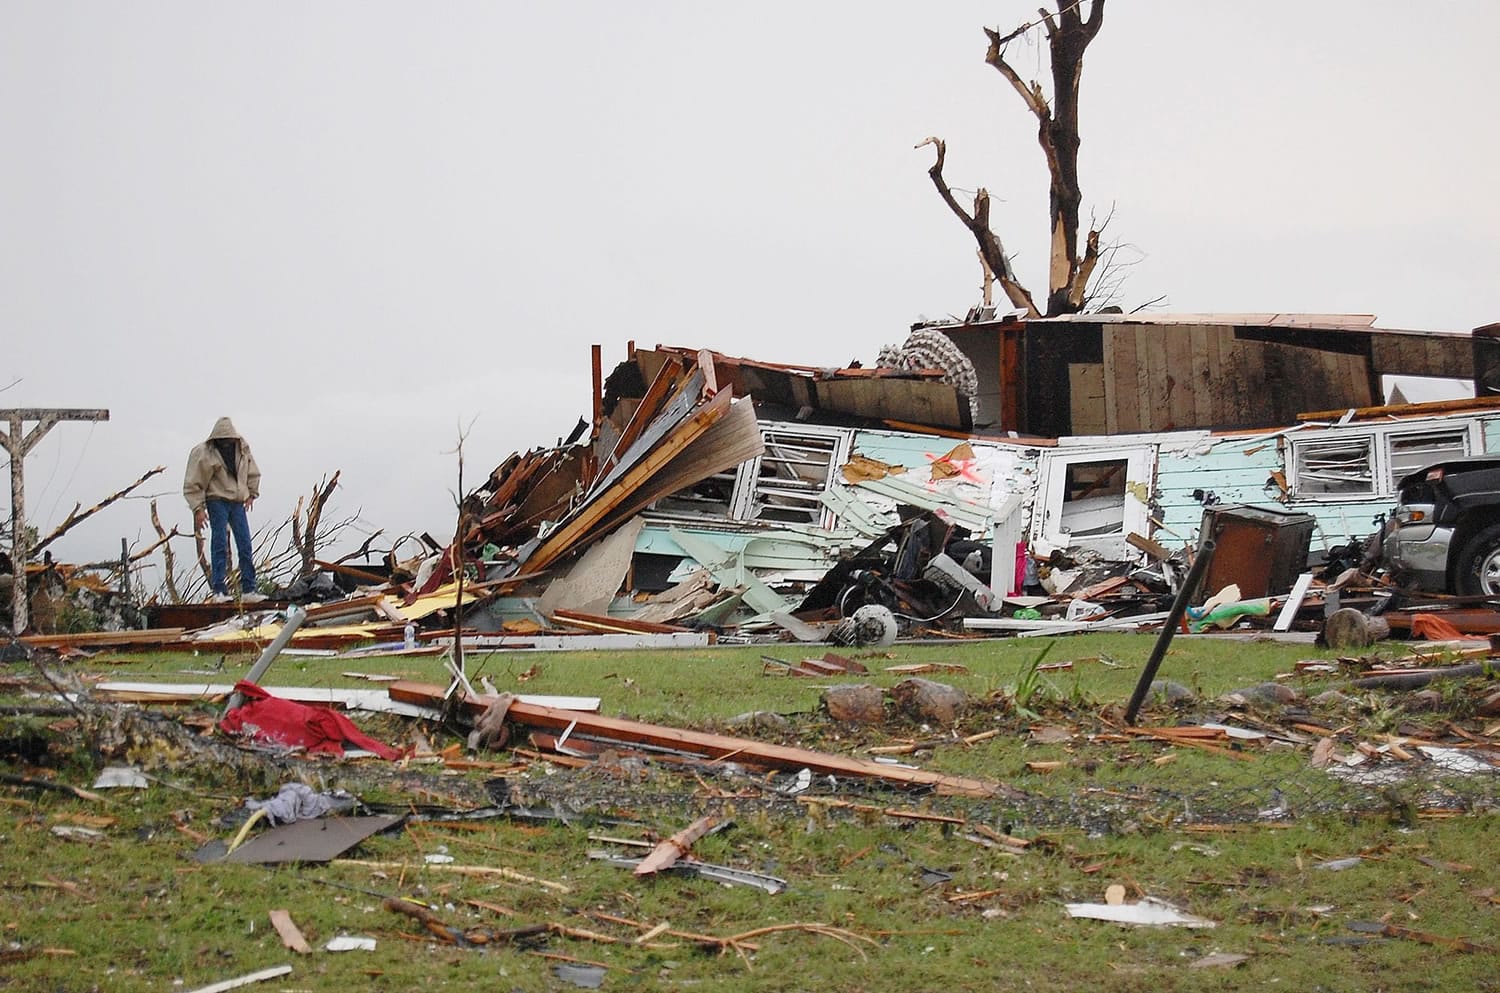 A man looks for something salvageable in the debris scattered around his demolished home in Joplin, Mo.